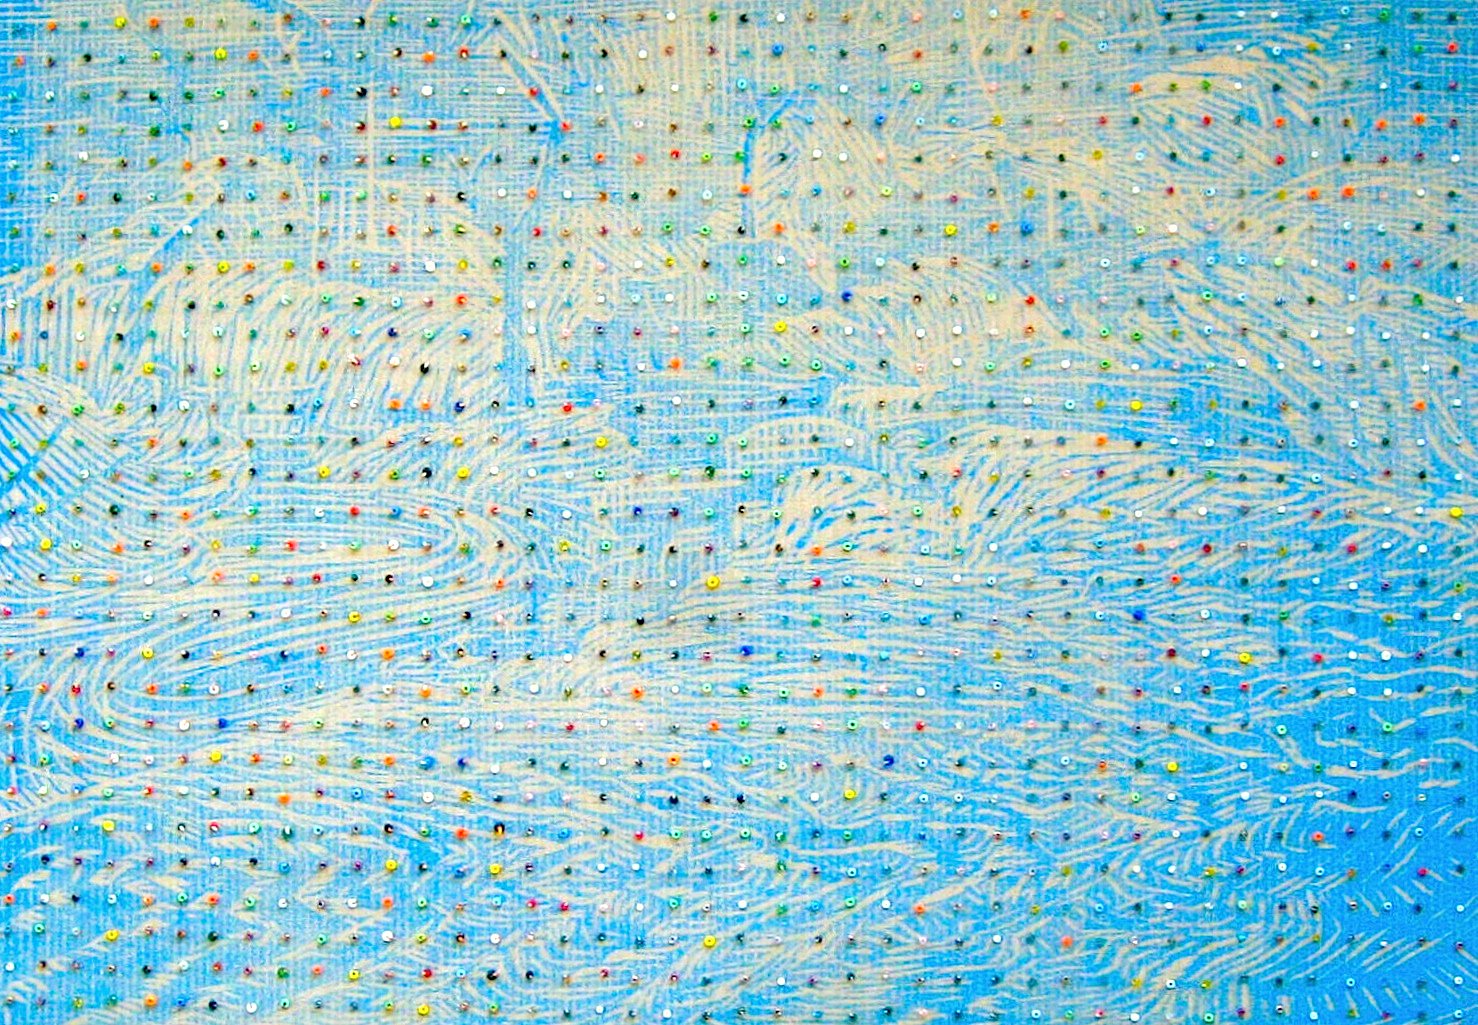 Eveline Kotai - Bead River 1, 2006, beads on woodcut print on Japanese paper, 30 x 45cm (private collection)